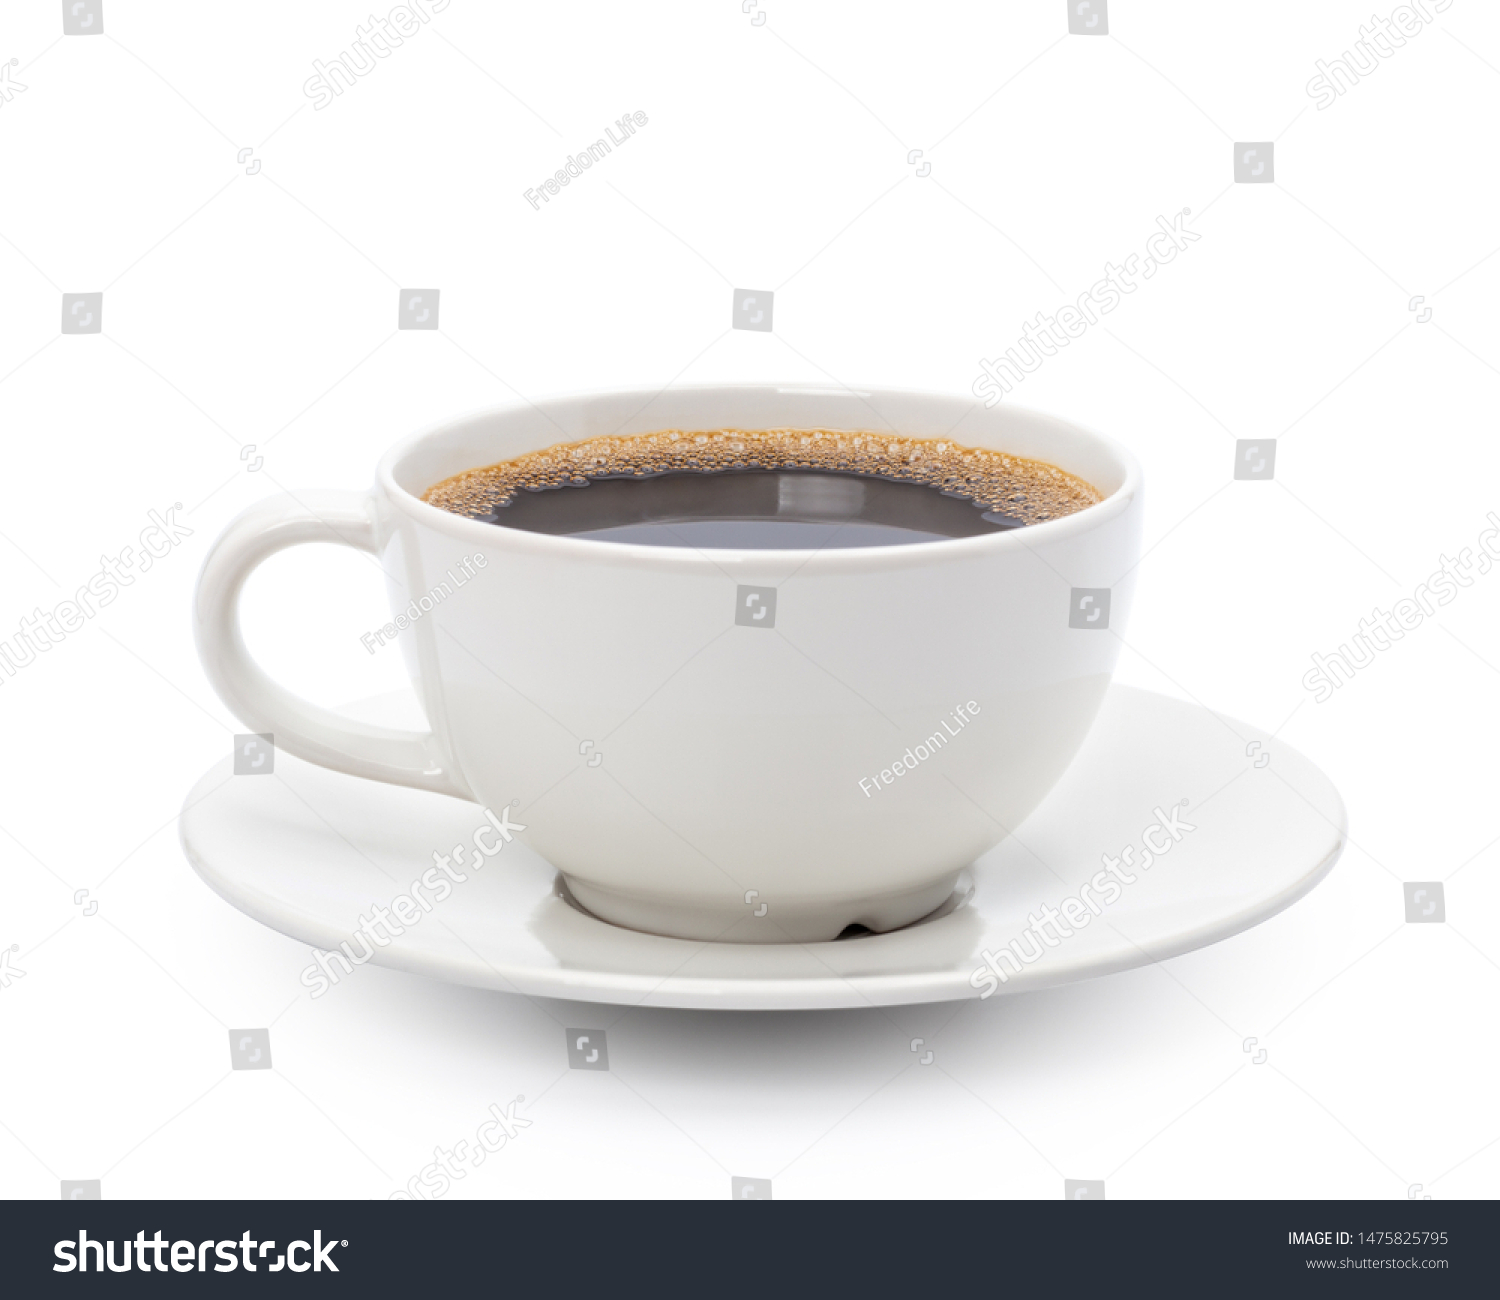 White cup of black coffee isolated on white background with clipping path #1475825795